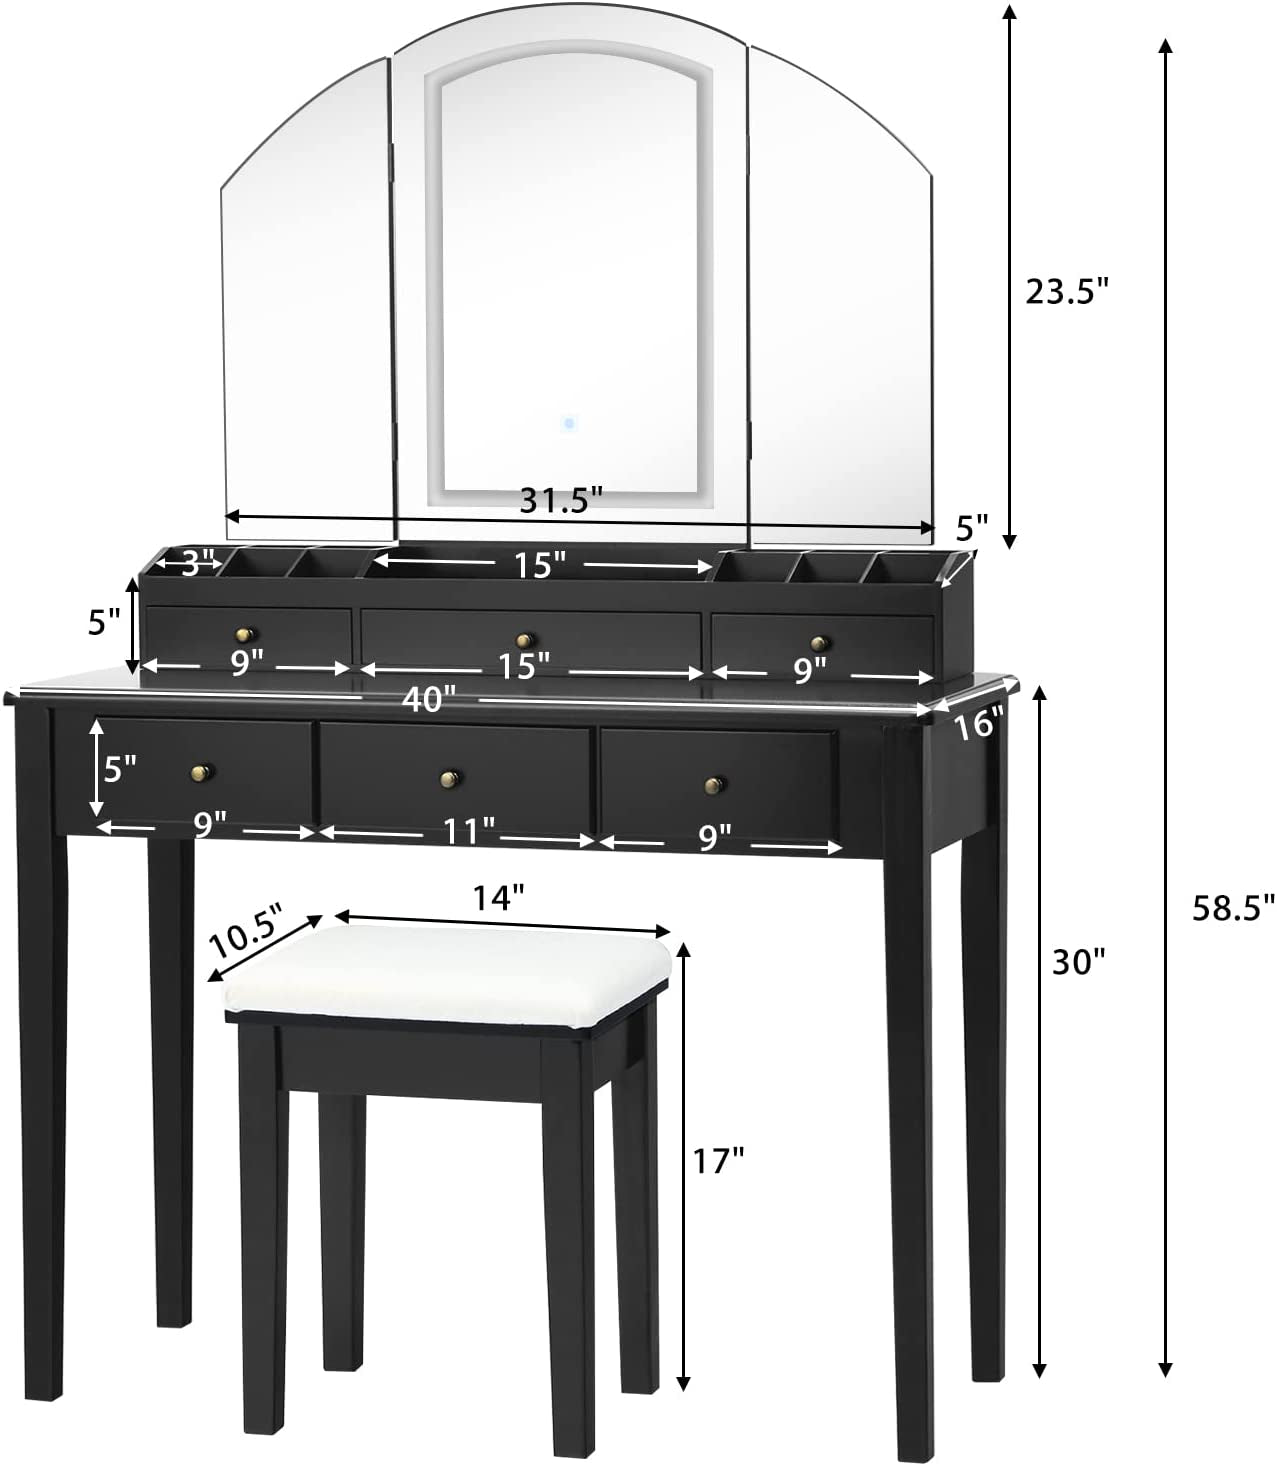 Professional title: " Large Vanity Set with Tri-Folding Lighted Mirror, Multiple Lighting Modes, Ample Storage Space, Bedroom Makeup Dressing Table with Comfortable Stool, Elegant Black Design"